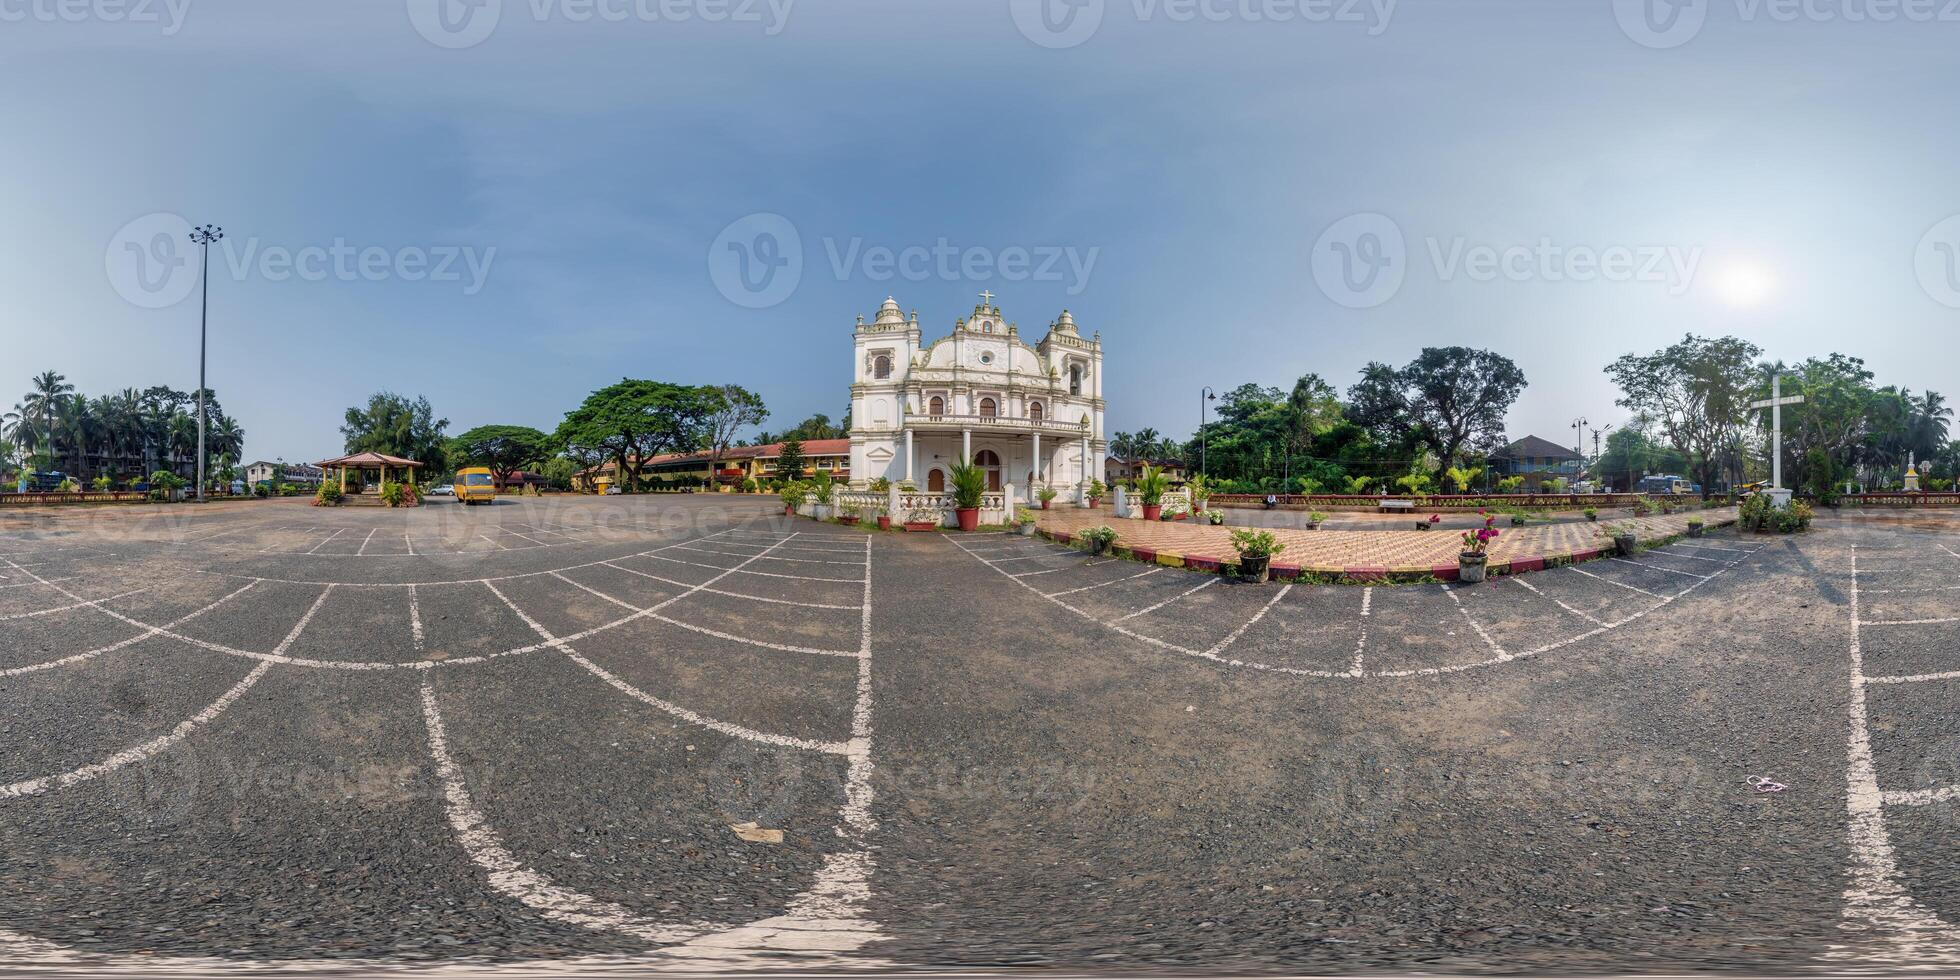 full hdri 360 panorama of portugal catholic church in jungle among palm trees in Indian tropic village in equirectangular projection with zenith and nadir. VR AR content photo